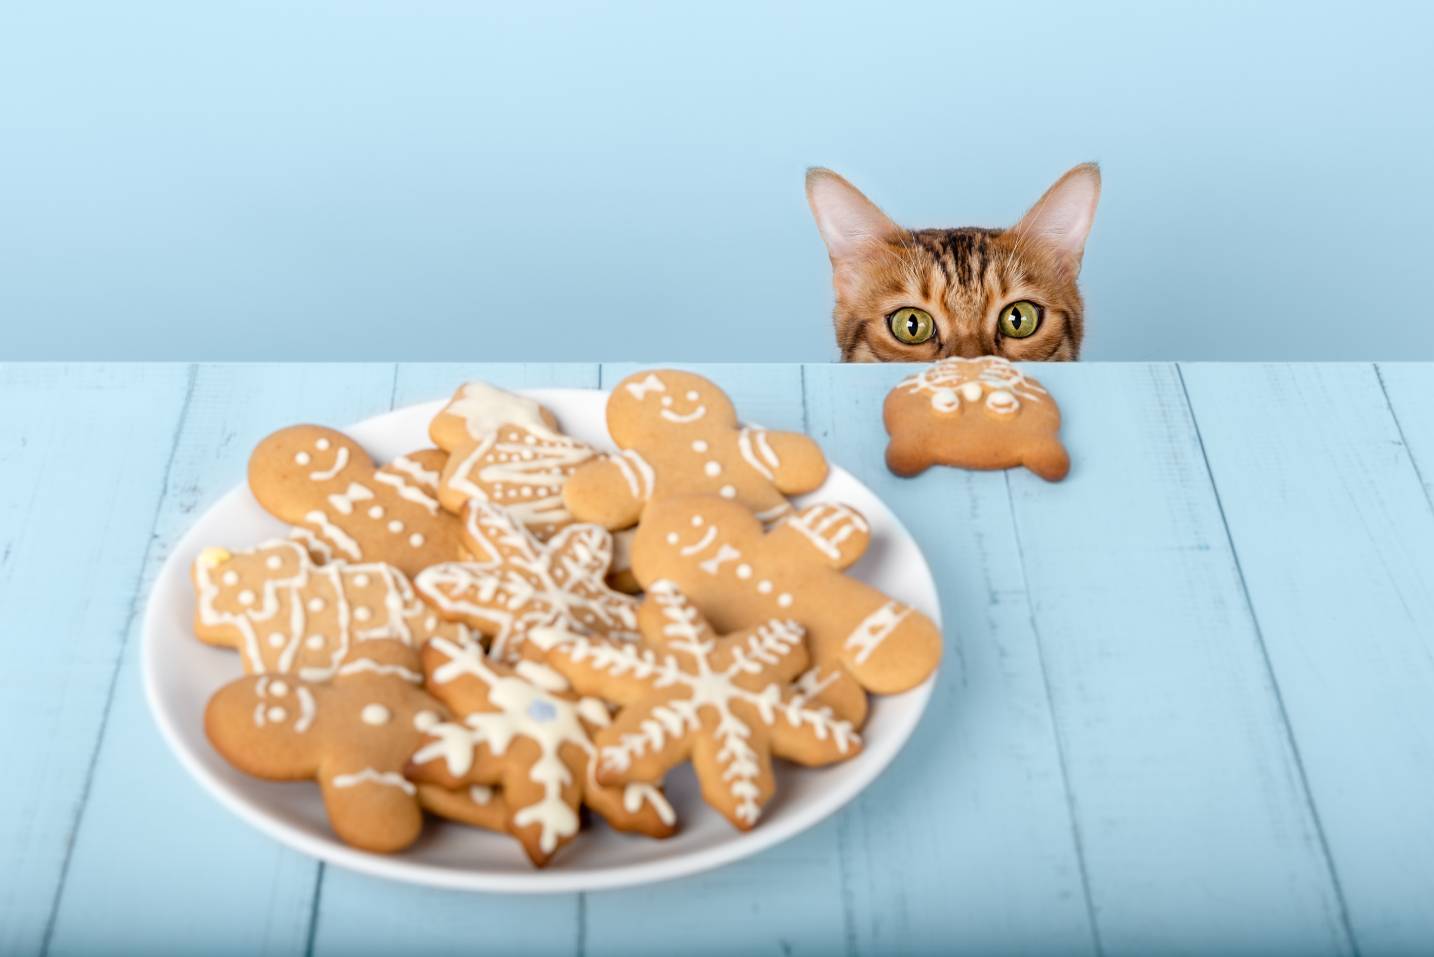 Bengal cat head peeks out from behind a table with Christmas cookies on a plate